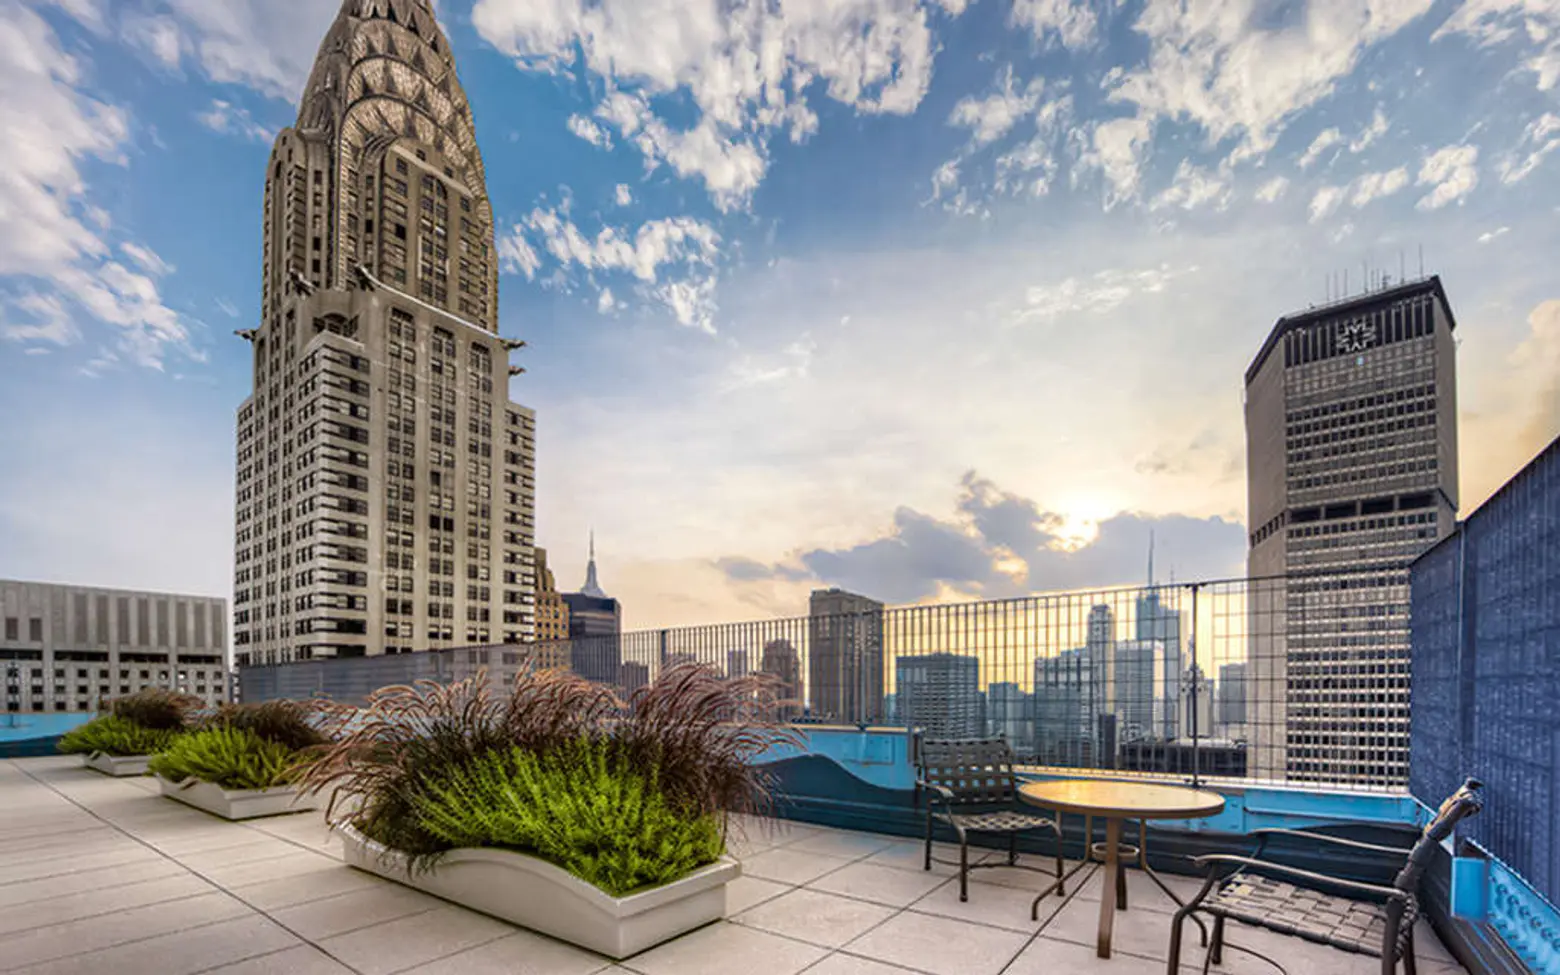 The Metropolis at 150 East 44th Street